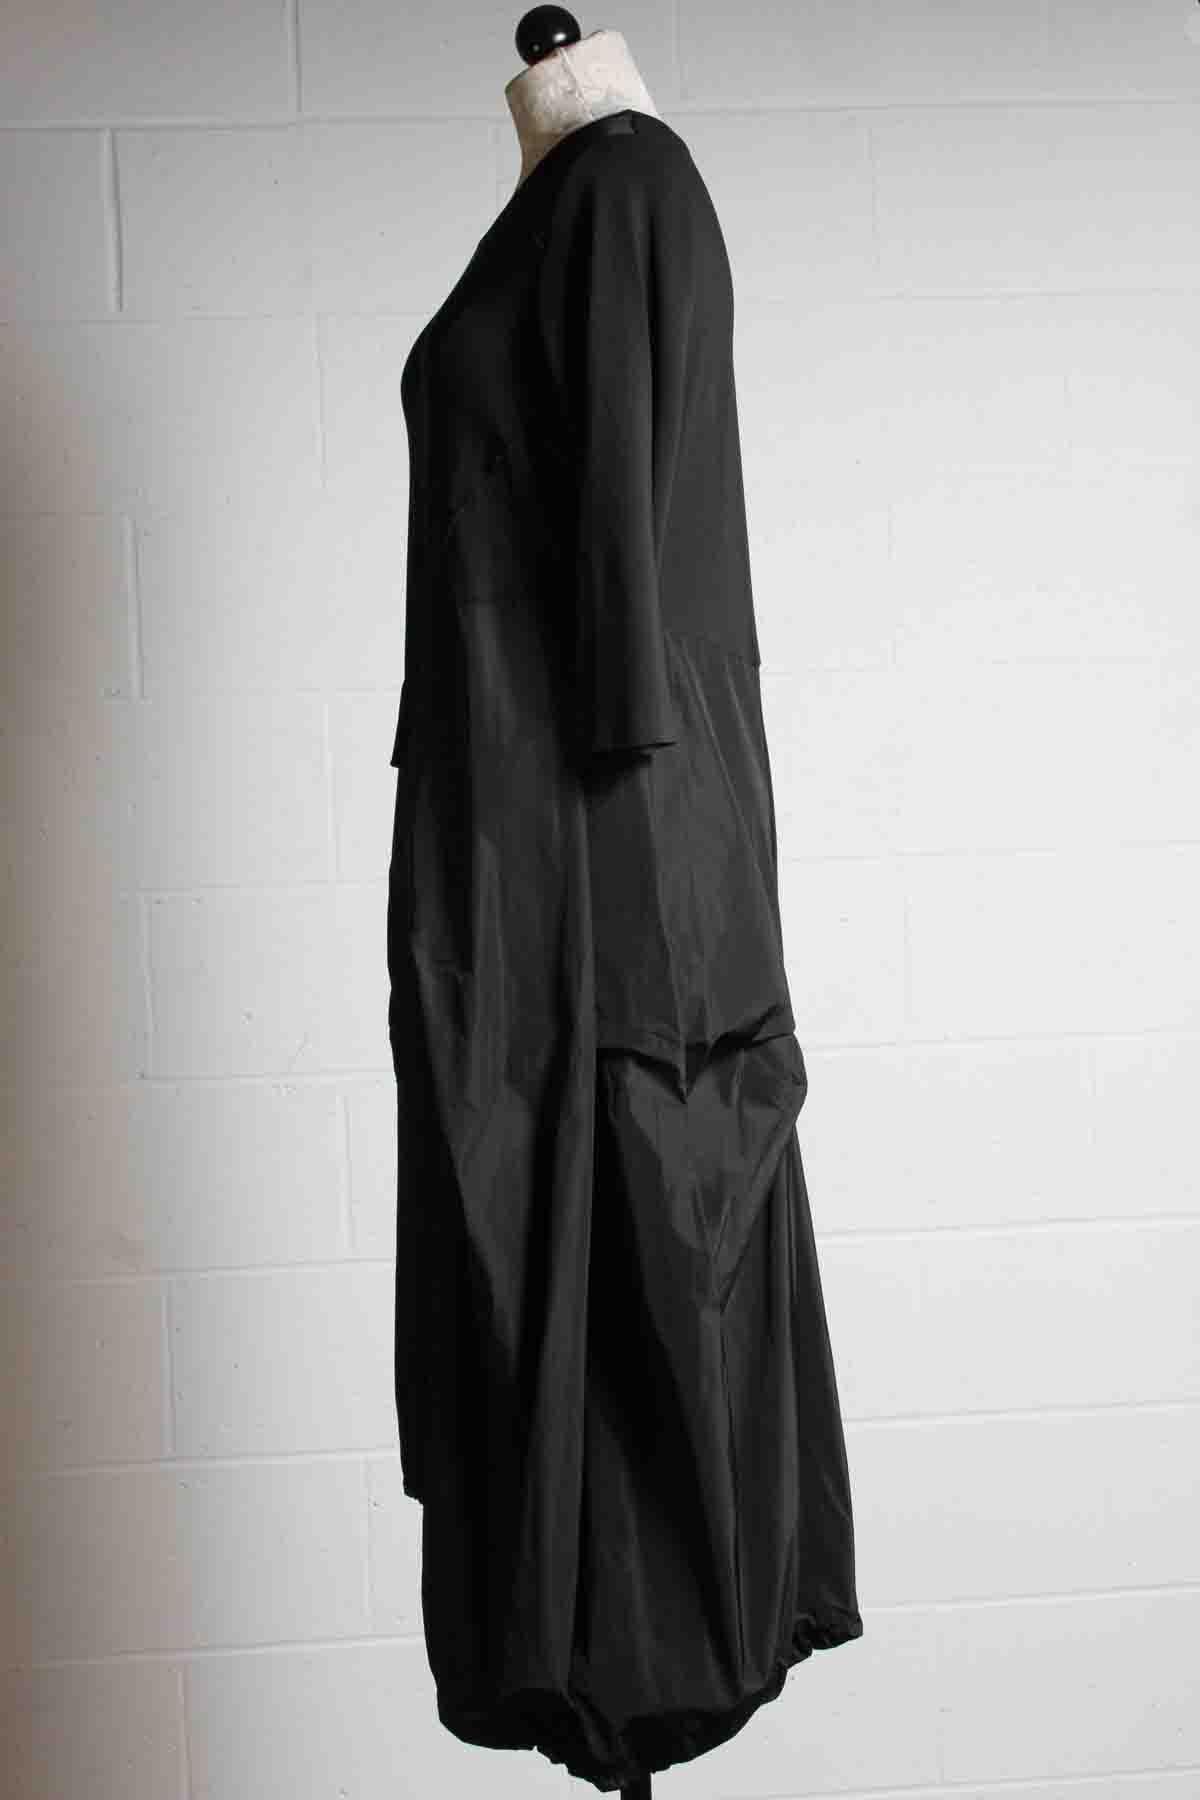 side view of black long sleeve dress by Reina Lee with an asymmetrical gathered bottom in contrasting fabrics